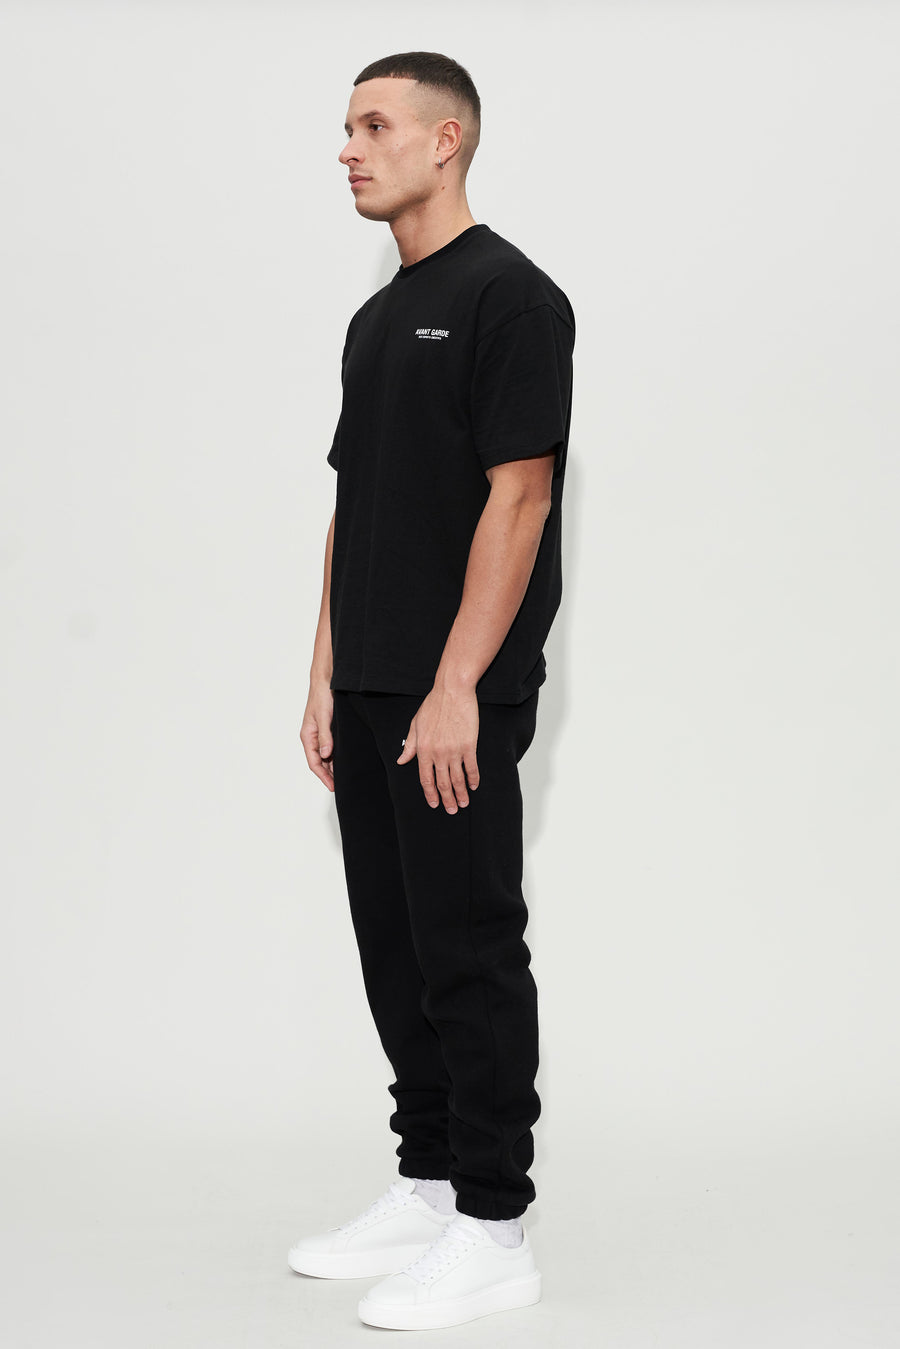 model wearing black oversized tee and joggers